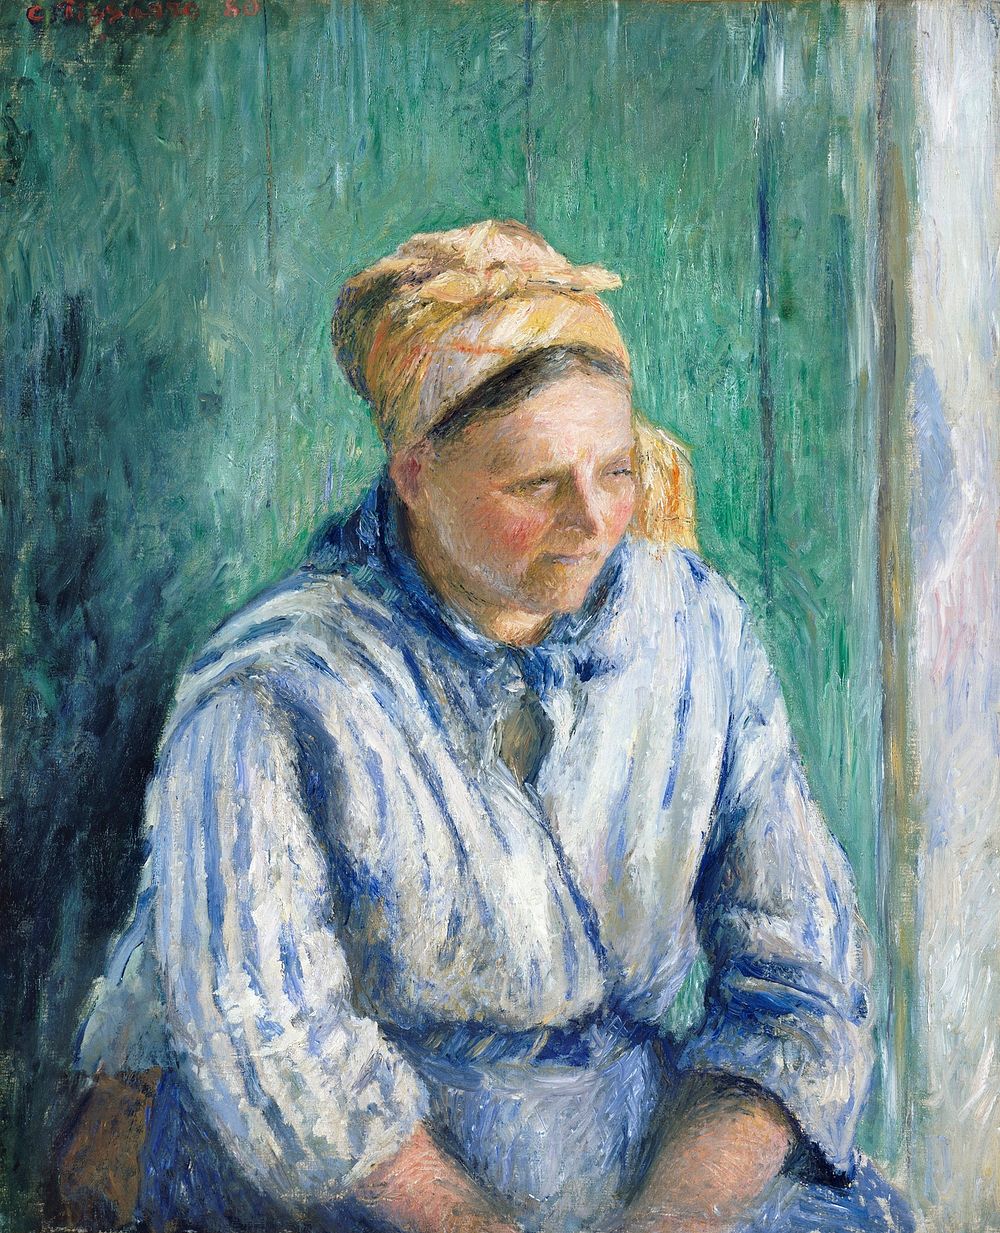 Washerwoman, Study (1880) by Camille Pissarro. Original from The MET museum. Digitally enhanced by rawpixel.